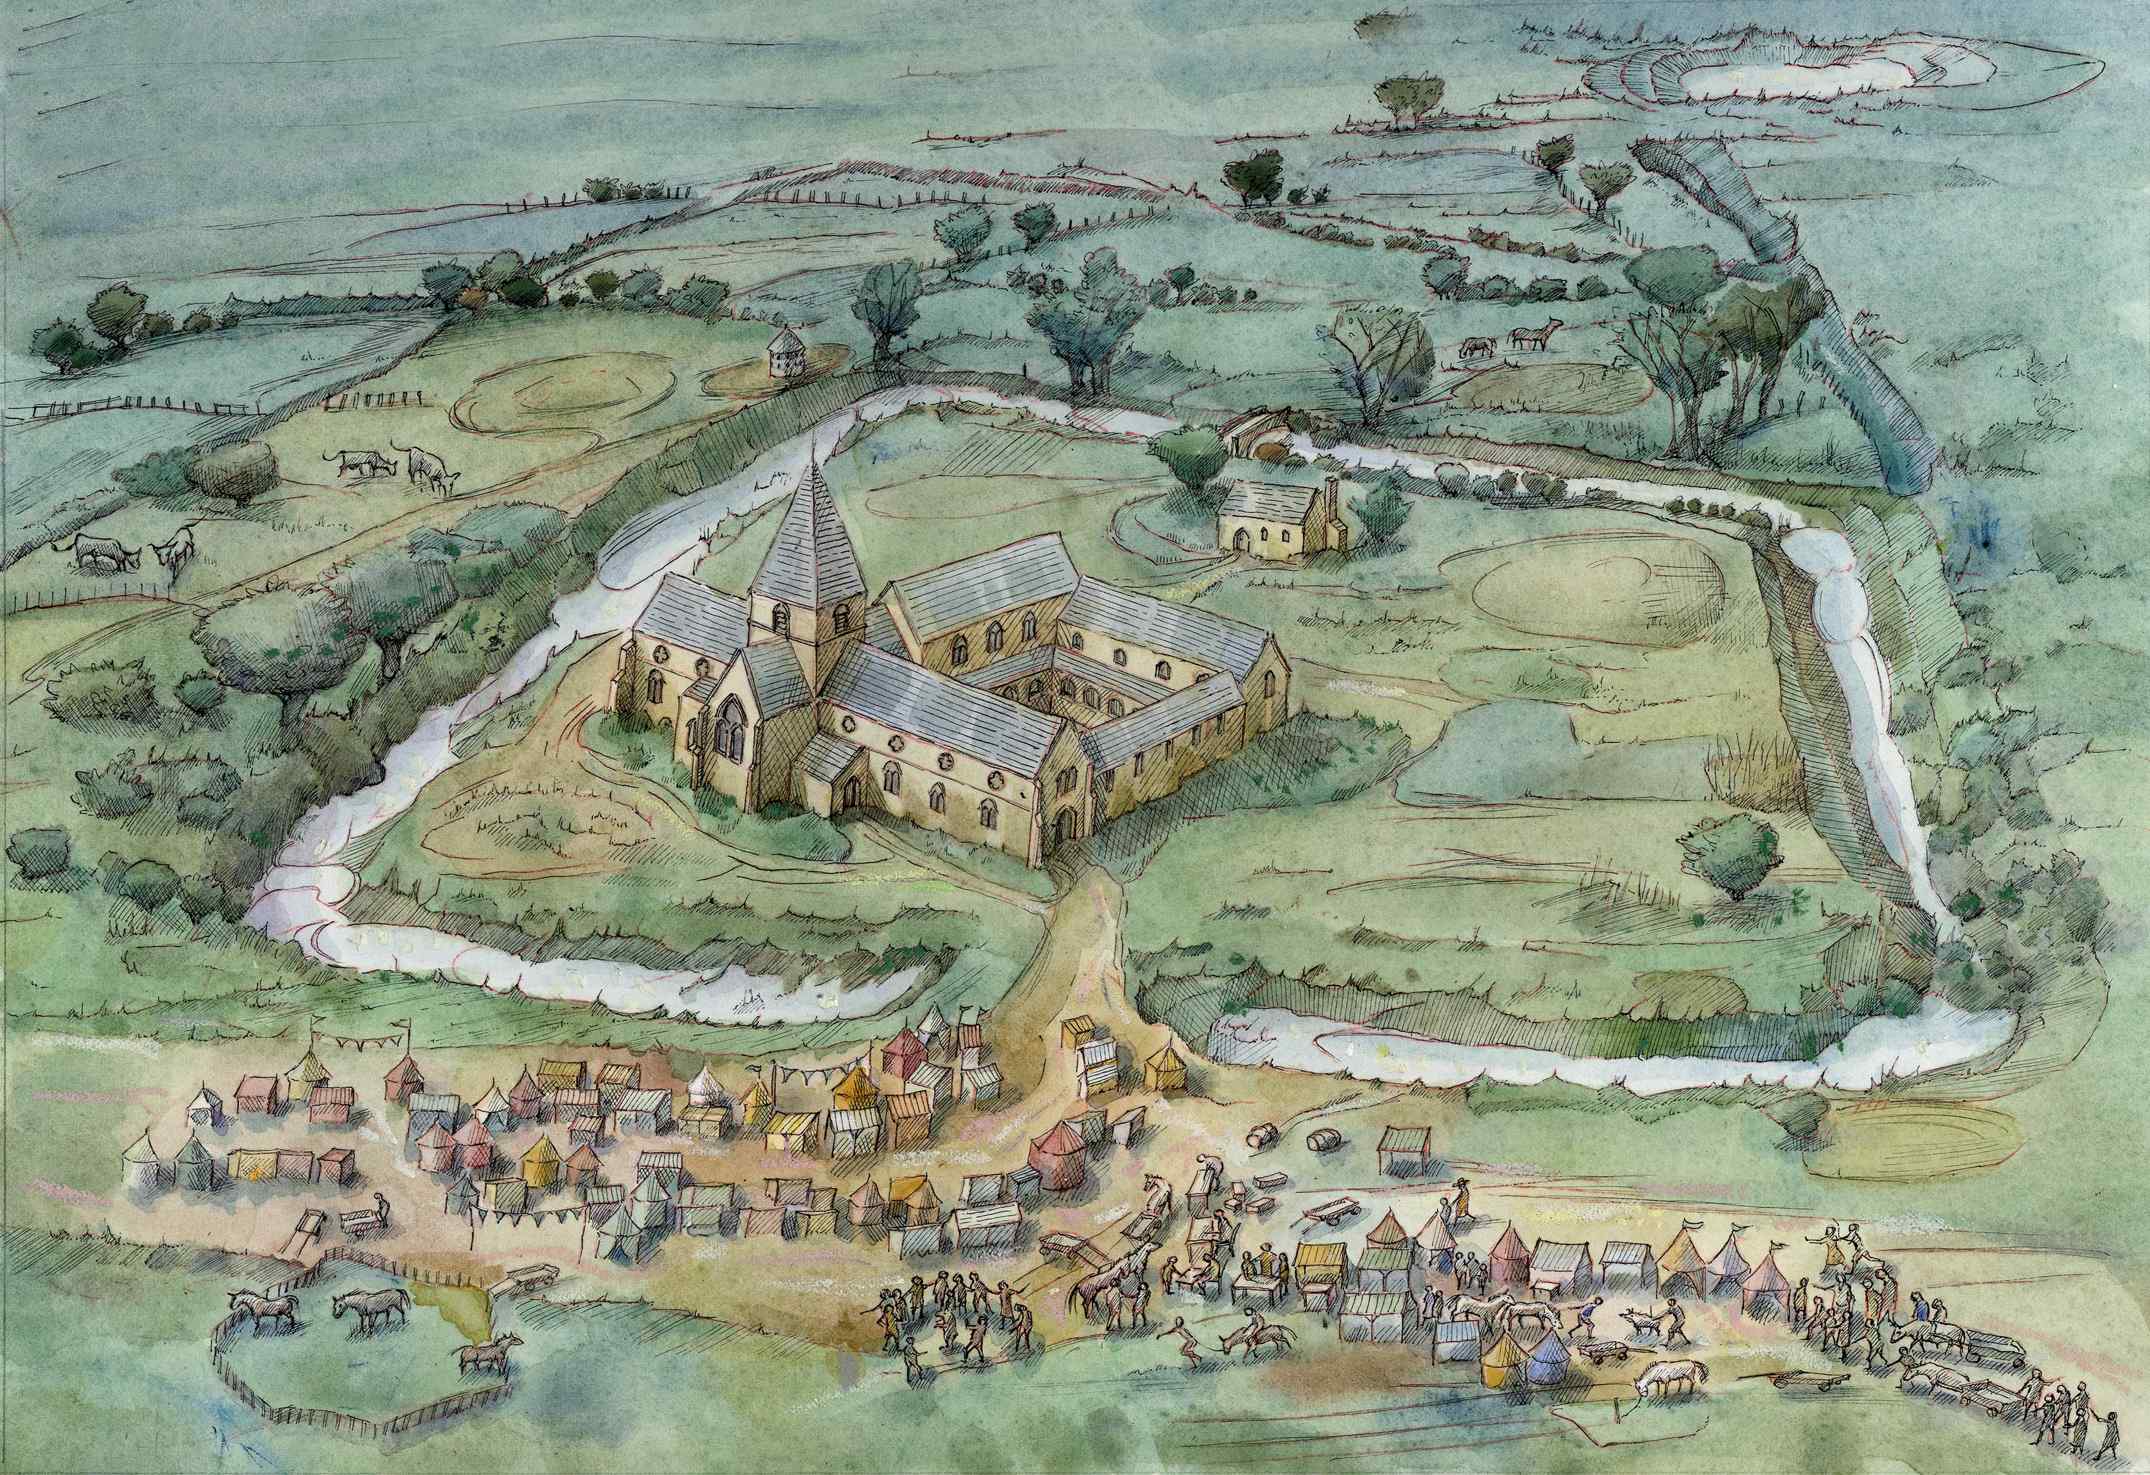 Artist's impression of the priory in the 14th century, with a fair in progress.